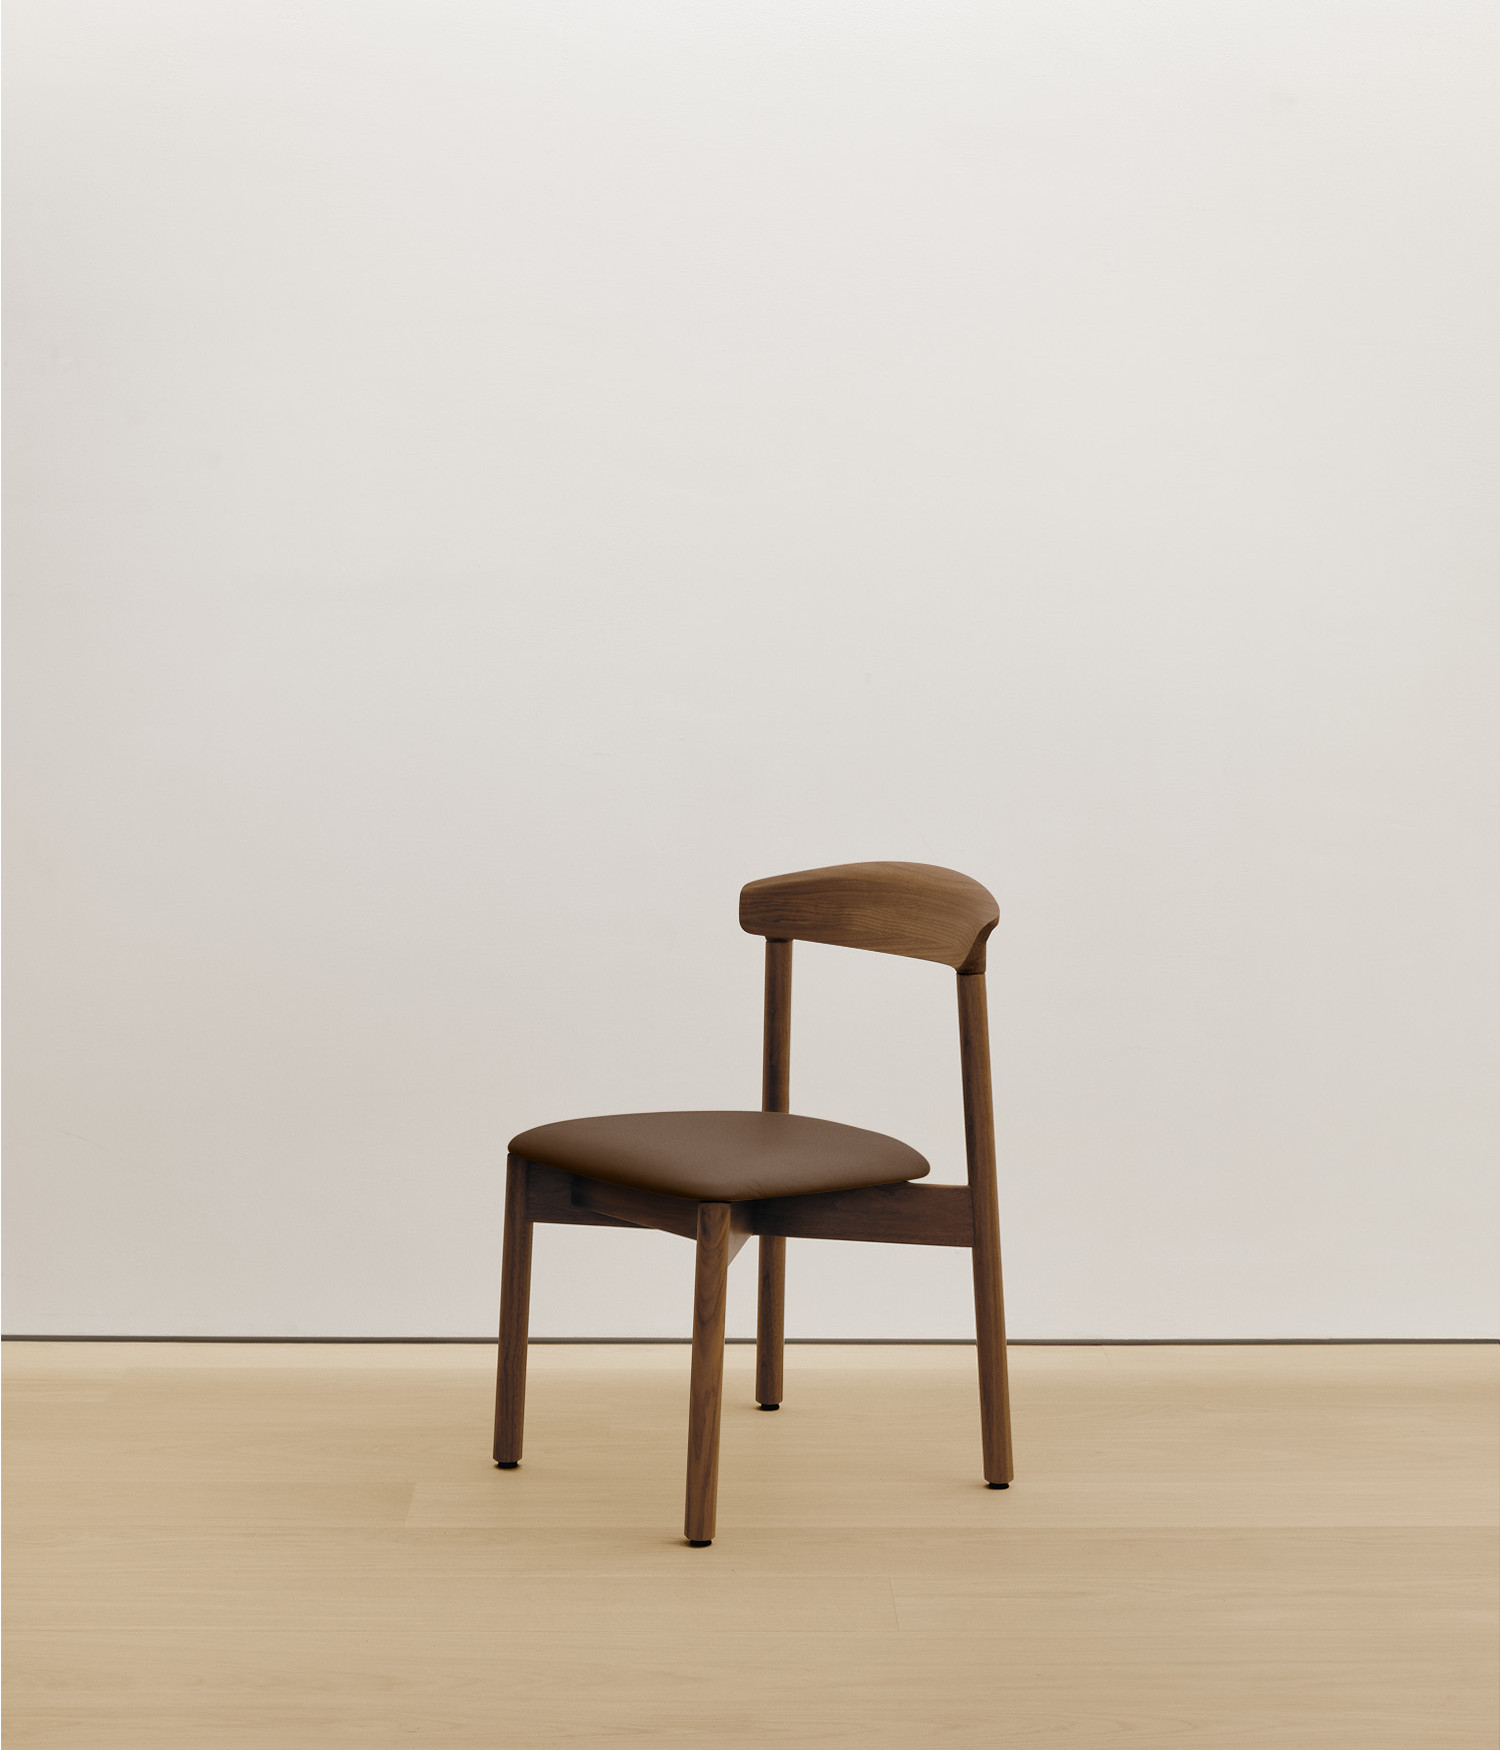  walnut chair with umber color upholstered seat